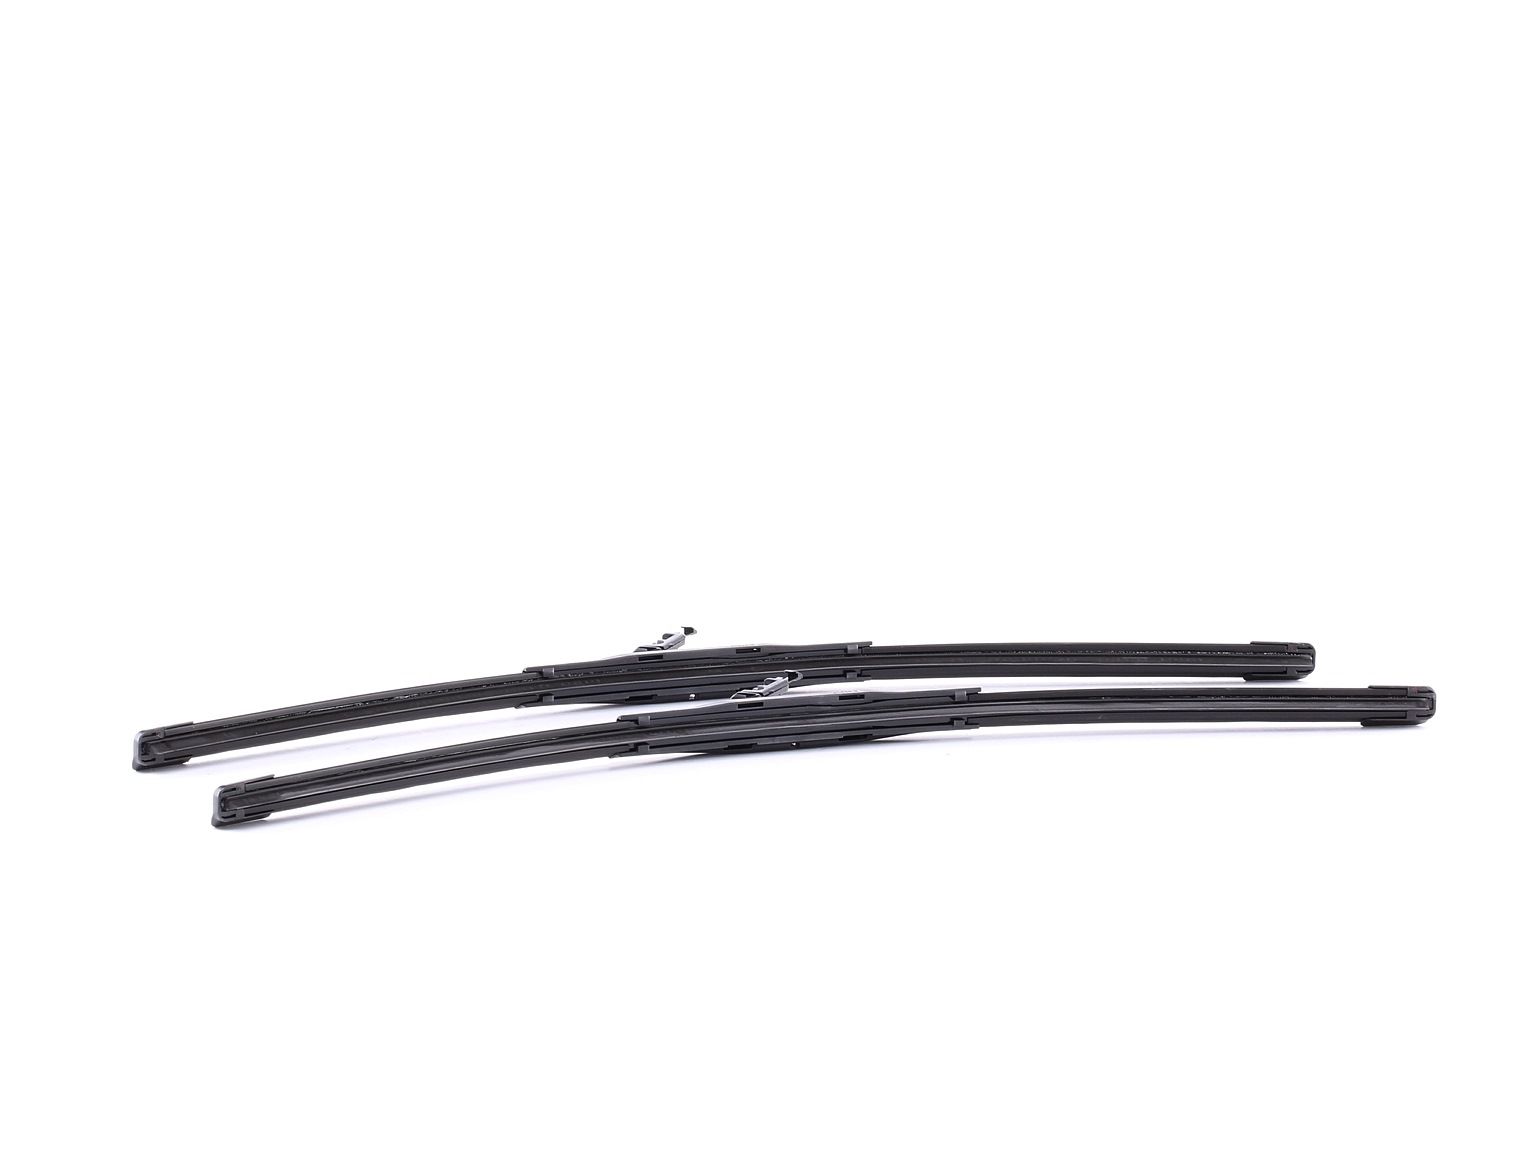 Mercedes E-Class Window wipers 13203626 Continental 2800011124280 online buy